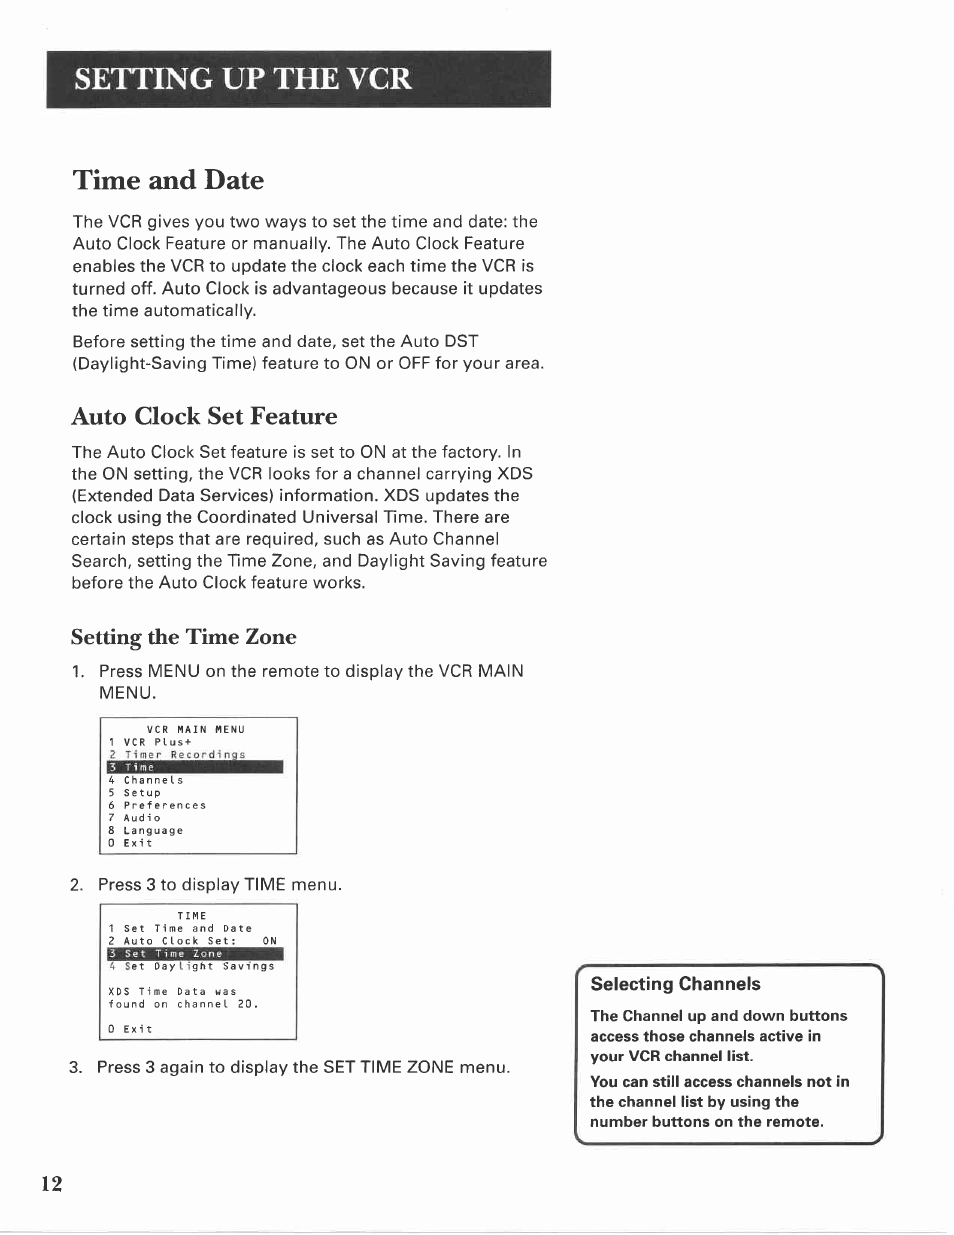 Auto clock set feature, Selecting channels, Time and date | Setting up the vcr, Setting the time zone | GE VG4275 User Manual | Page 14 / 72